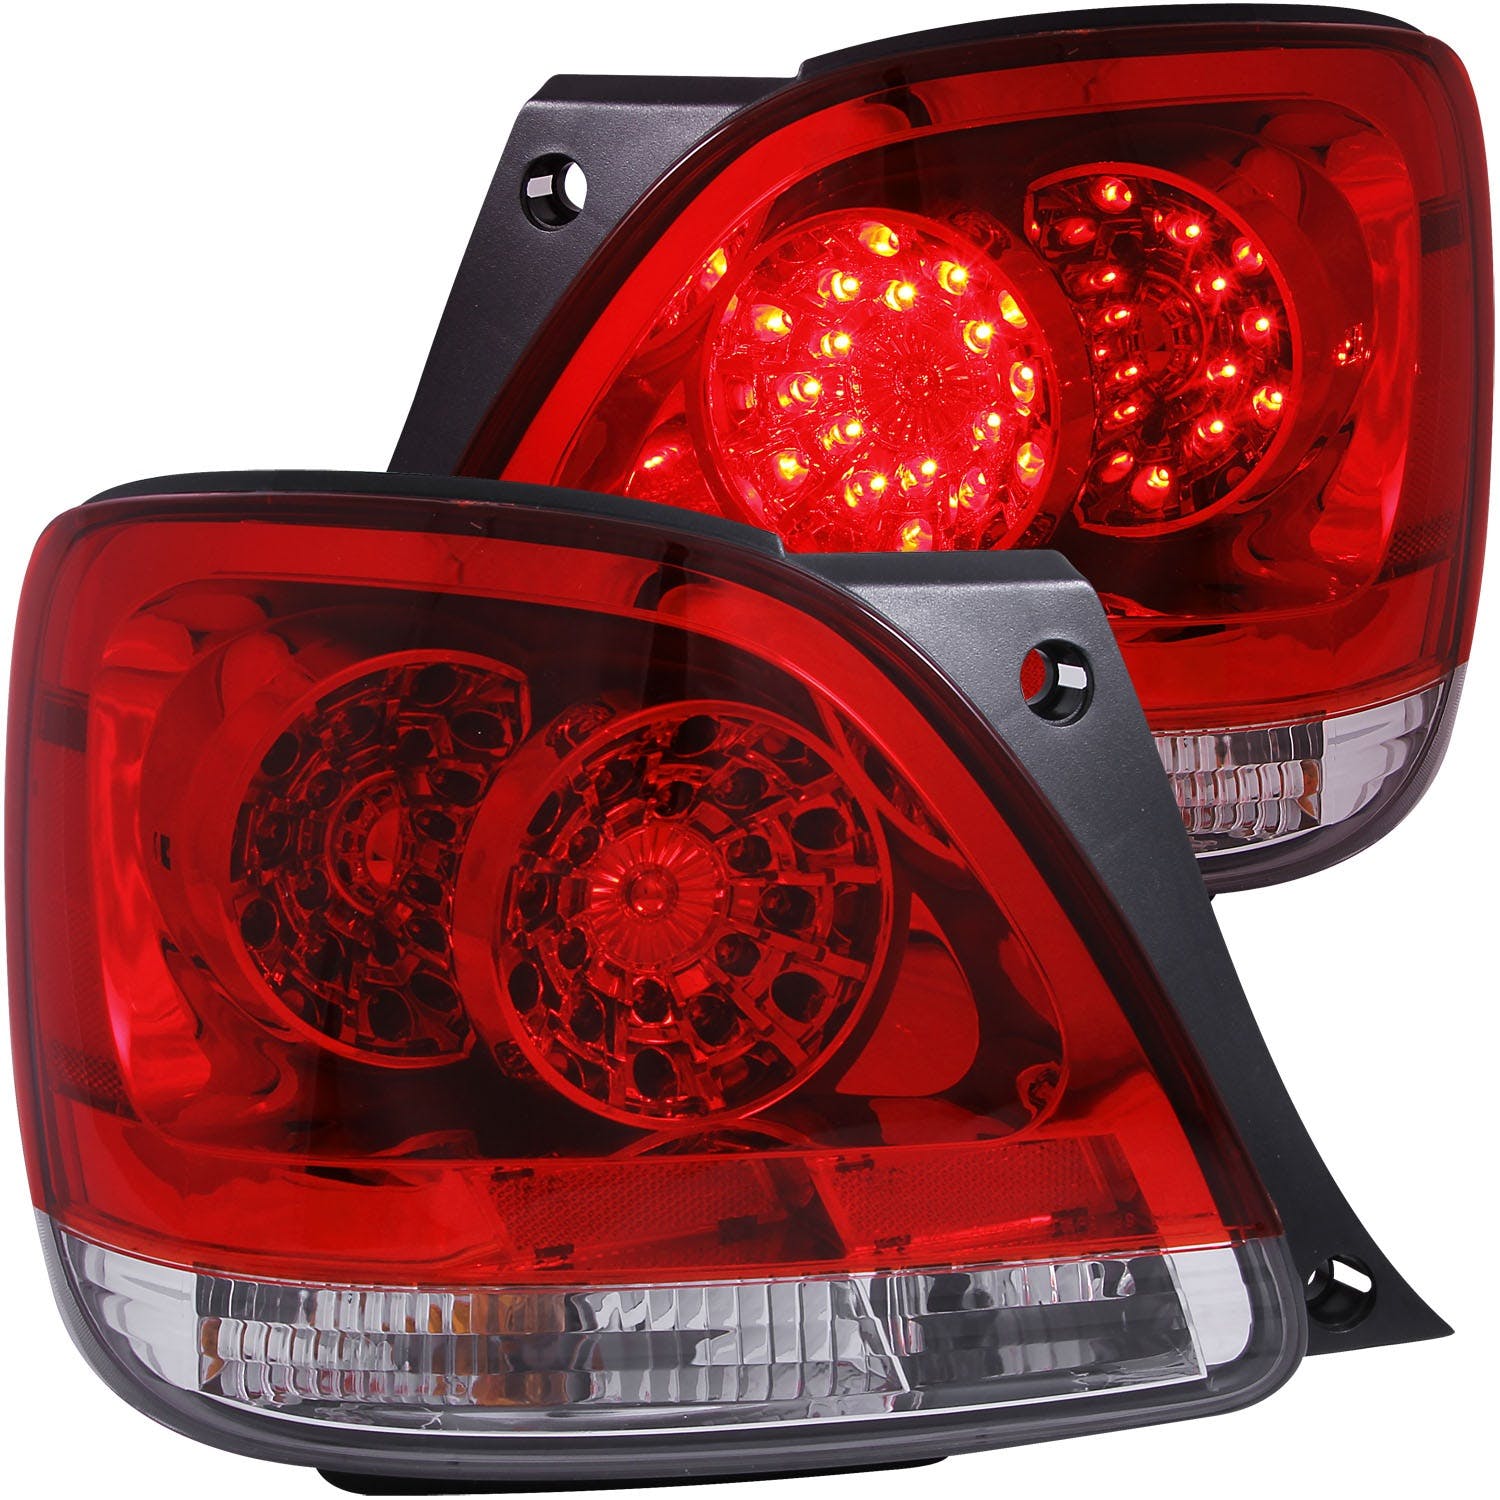 AnzoUSA 321101 LED Taillights Red/Clear